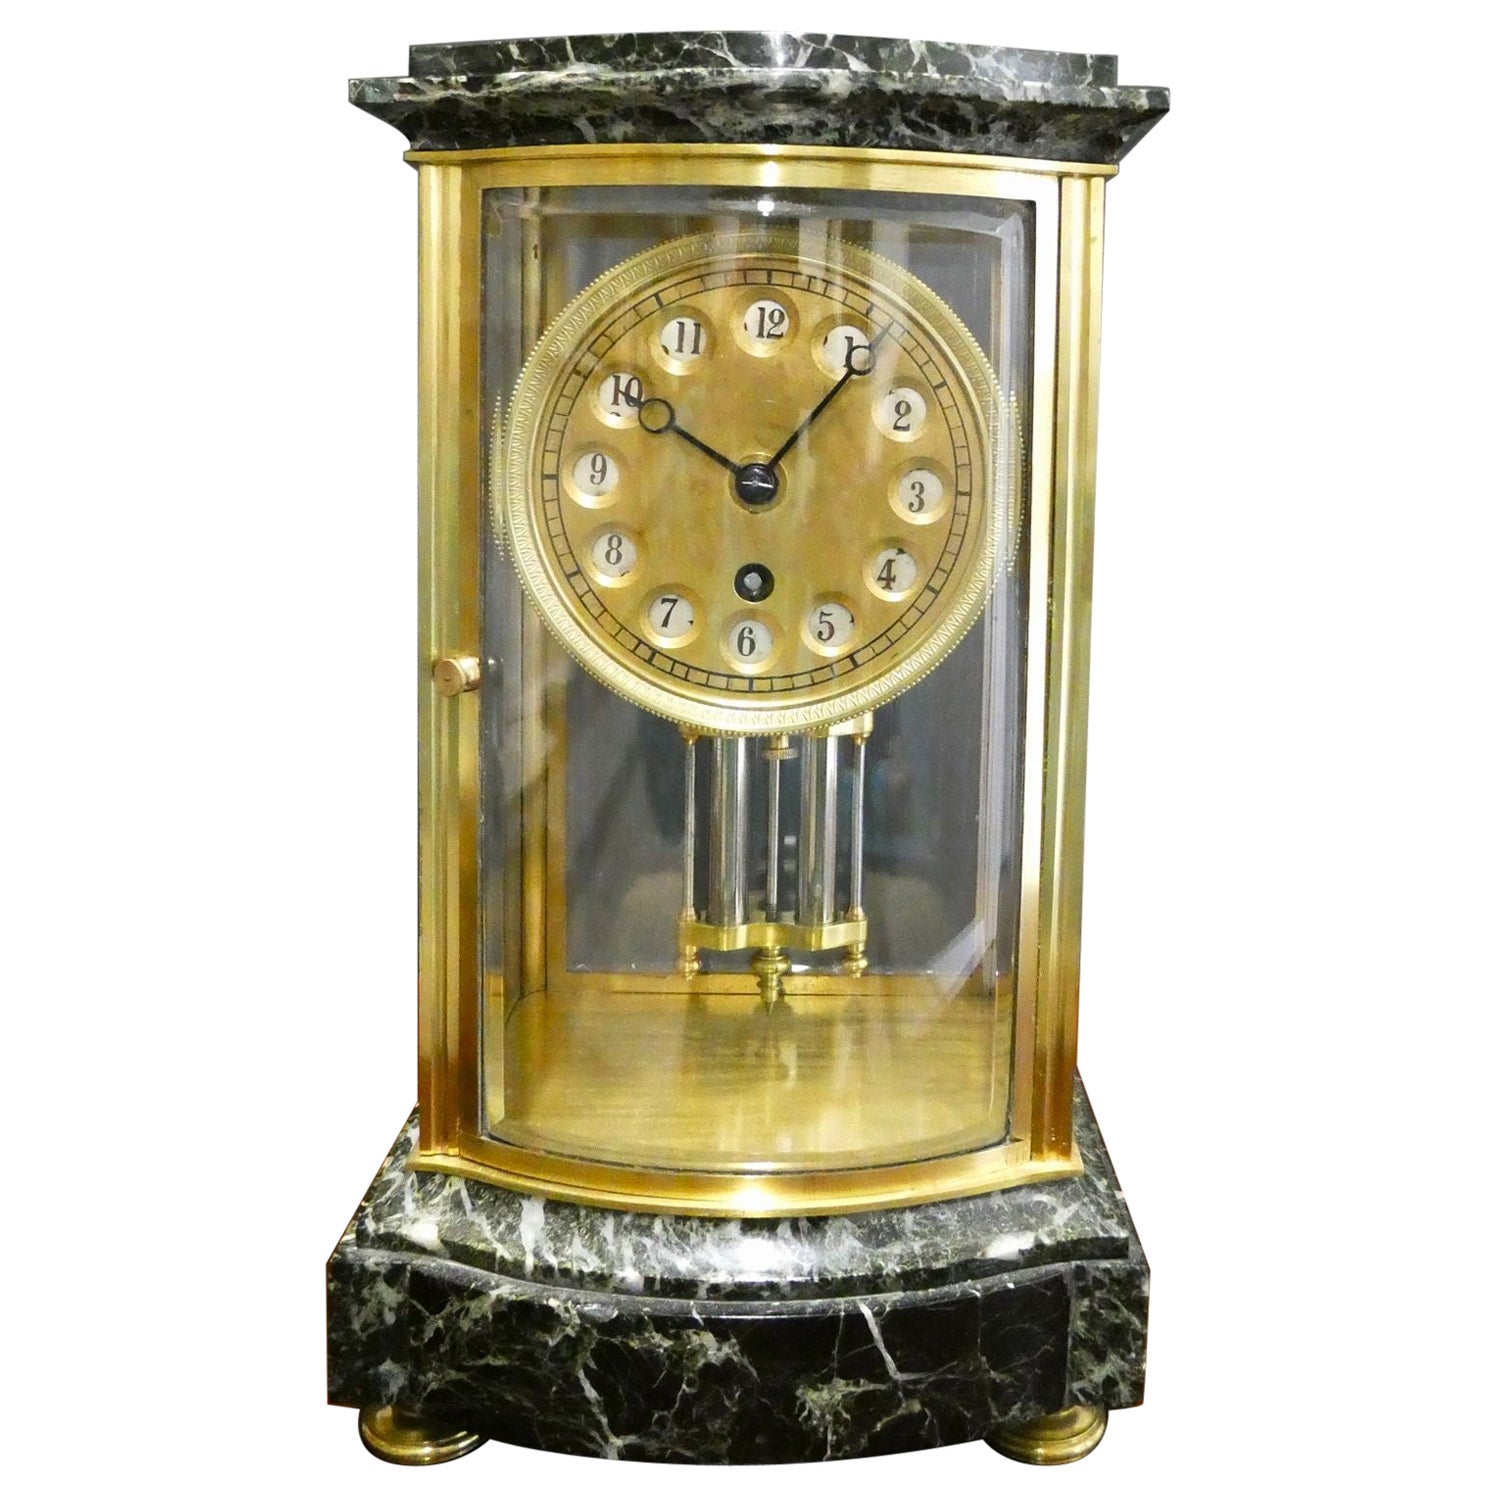 What is mercury used for in clocks?